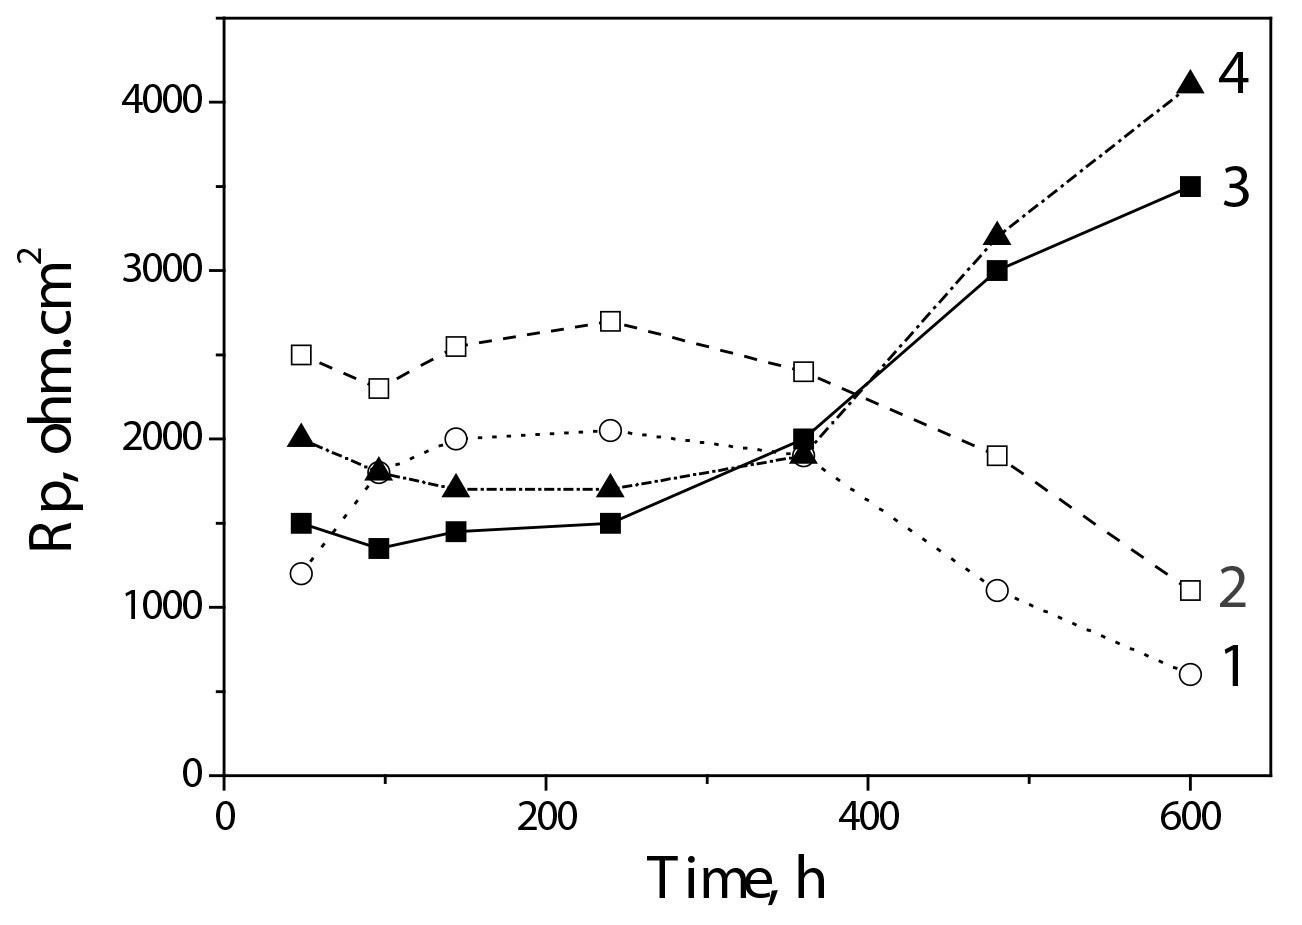 Fig. 9: Rp measurements for coatings with different CL: 1 – Zn-Mn (TCL); 2 - Zn-Mn 0.1 (TCL);  3 - Zn-Mn (GCL); 4 - Zn-Mn 0.1 (GCL)